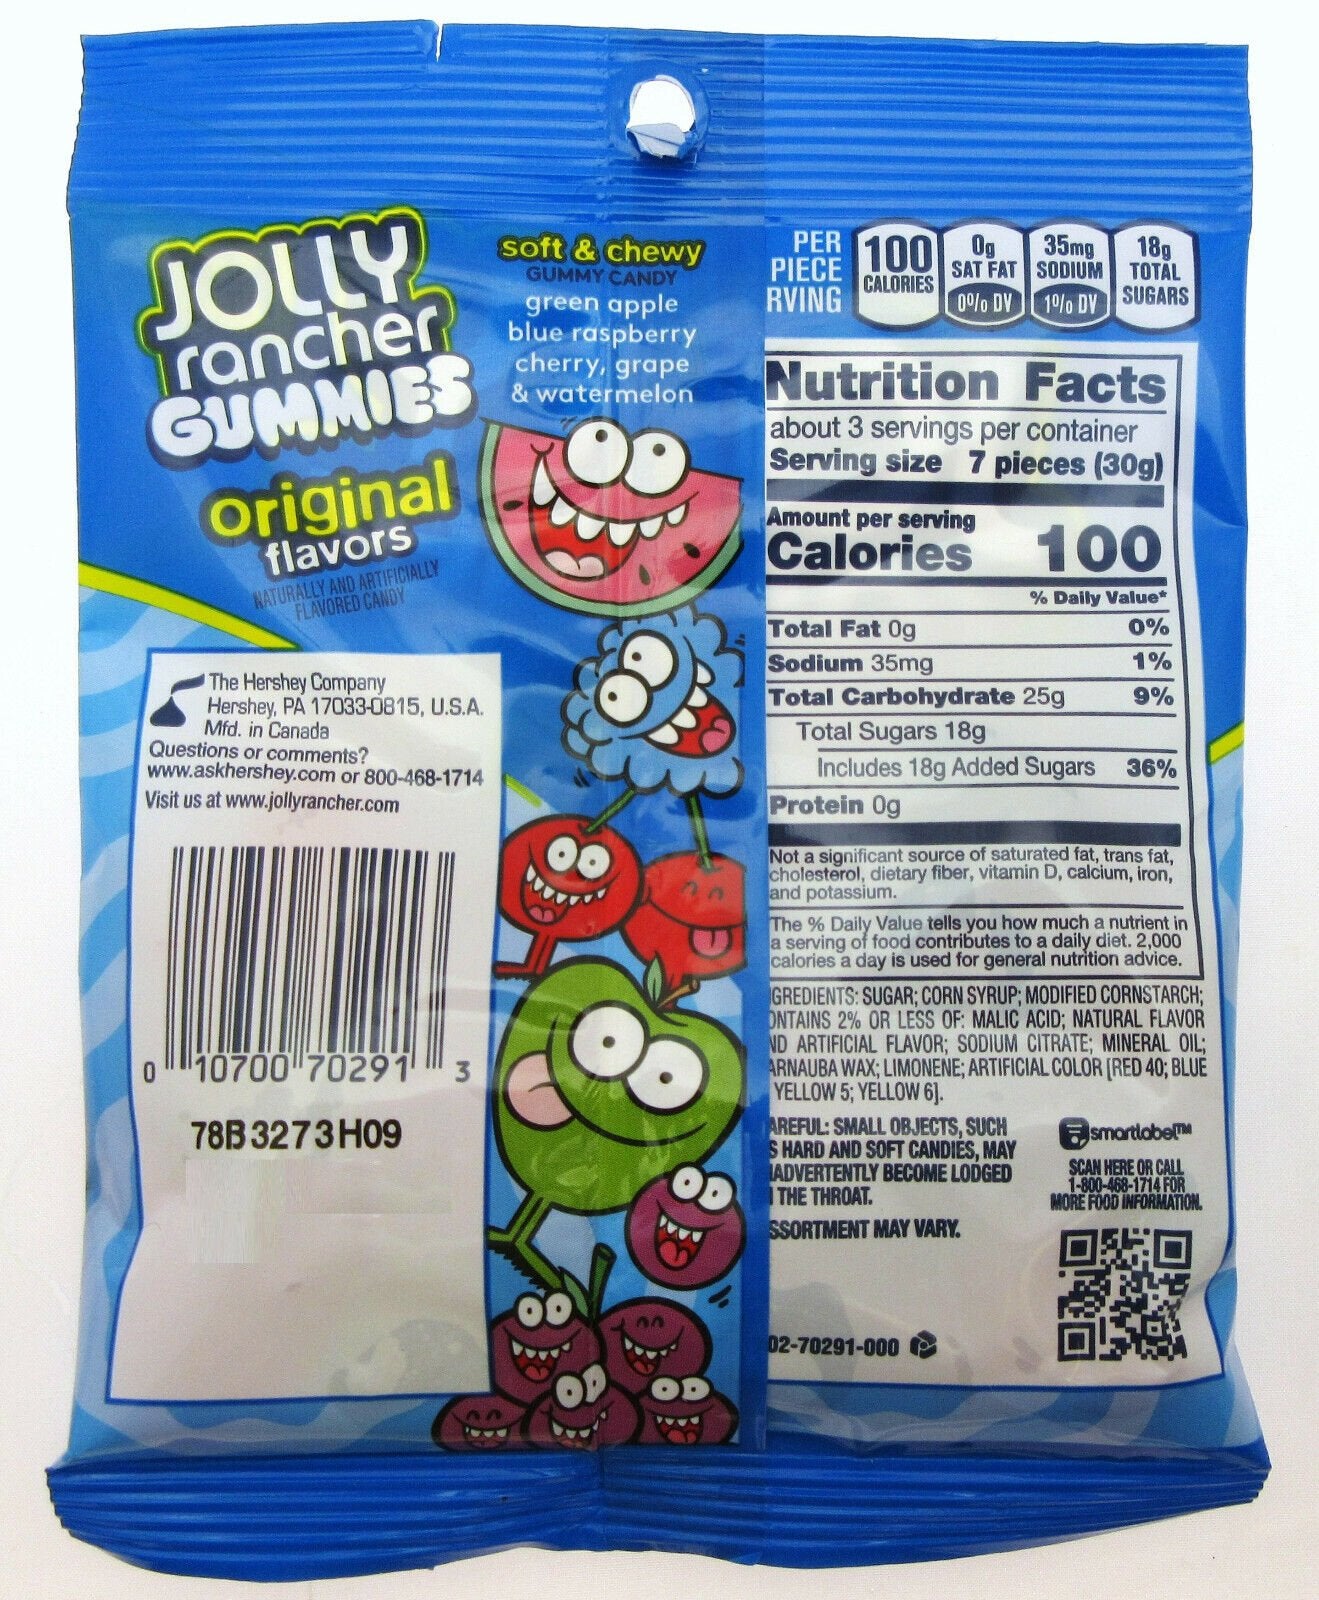 New! Jolly Rancher Gummies ORIGINAL ~ Soft Chewy Candy ~ 3.4oz Bag ~ Lot of 2